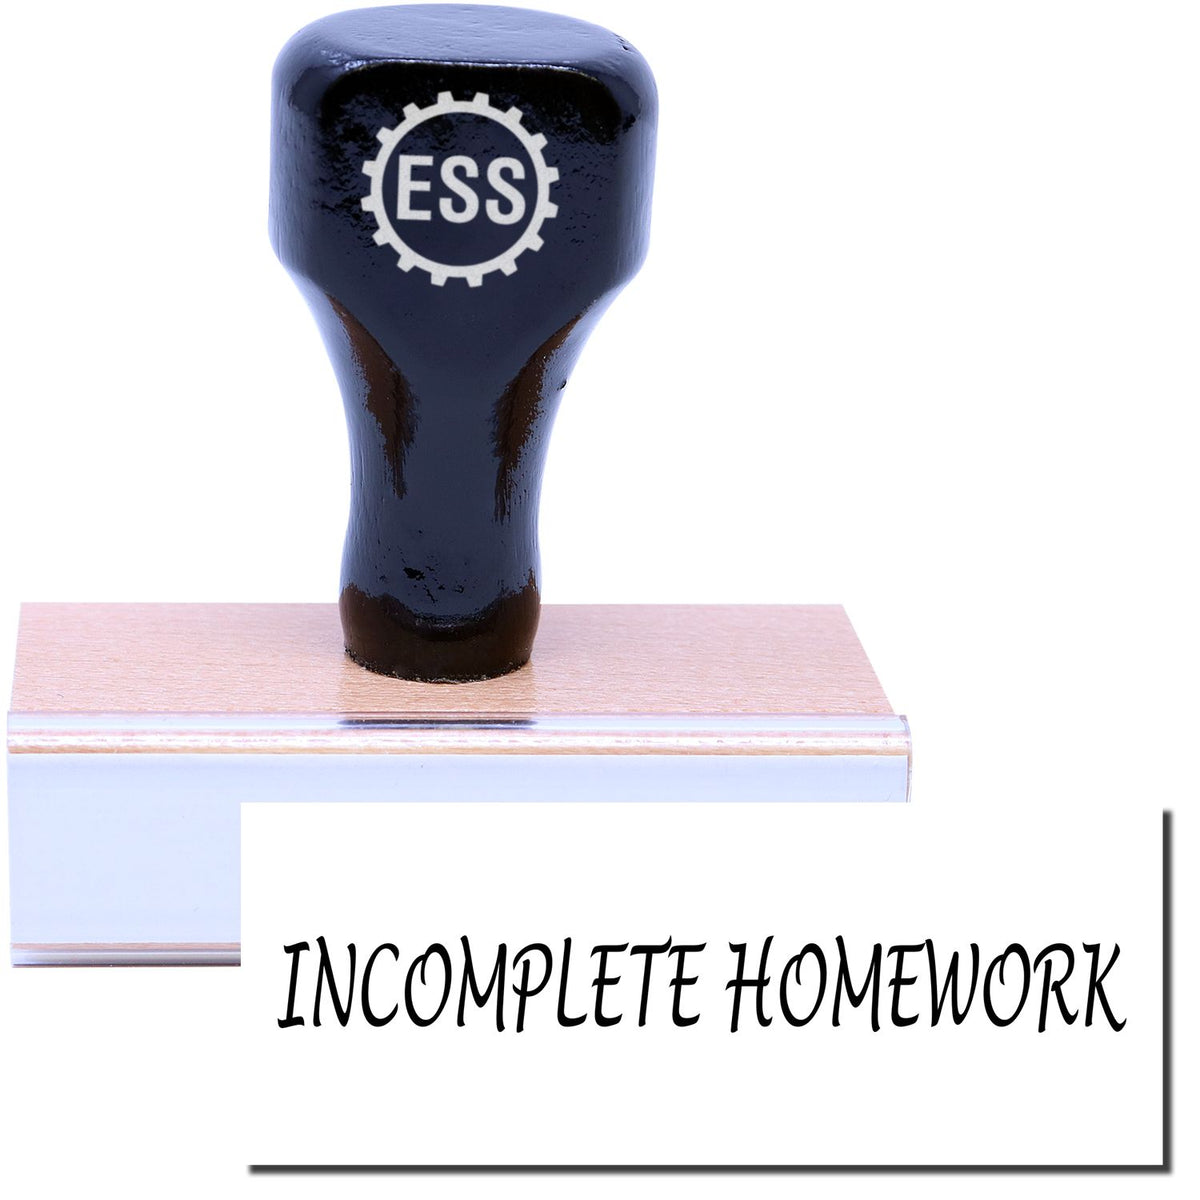 A stock office rubber stamp with a stamped image showing how the text &quot;INCOMPLETE HOMEWORK&quot; is displayed after stamping.